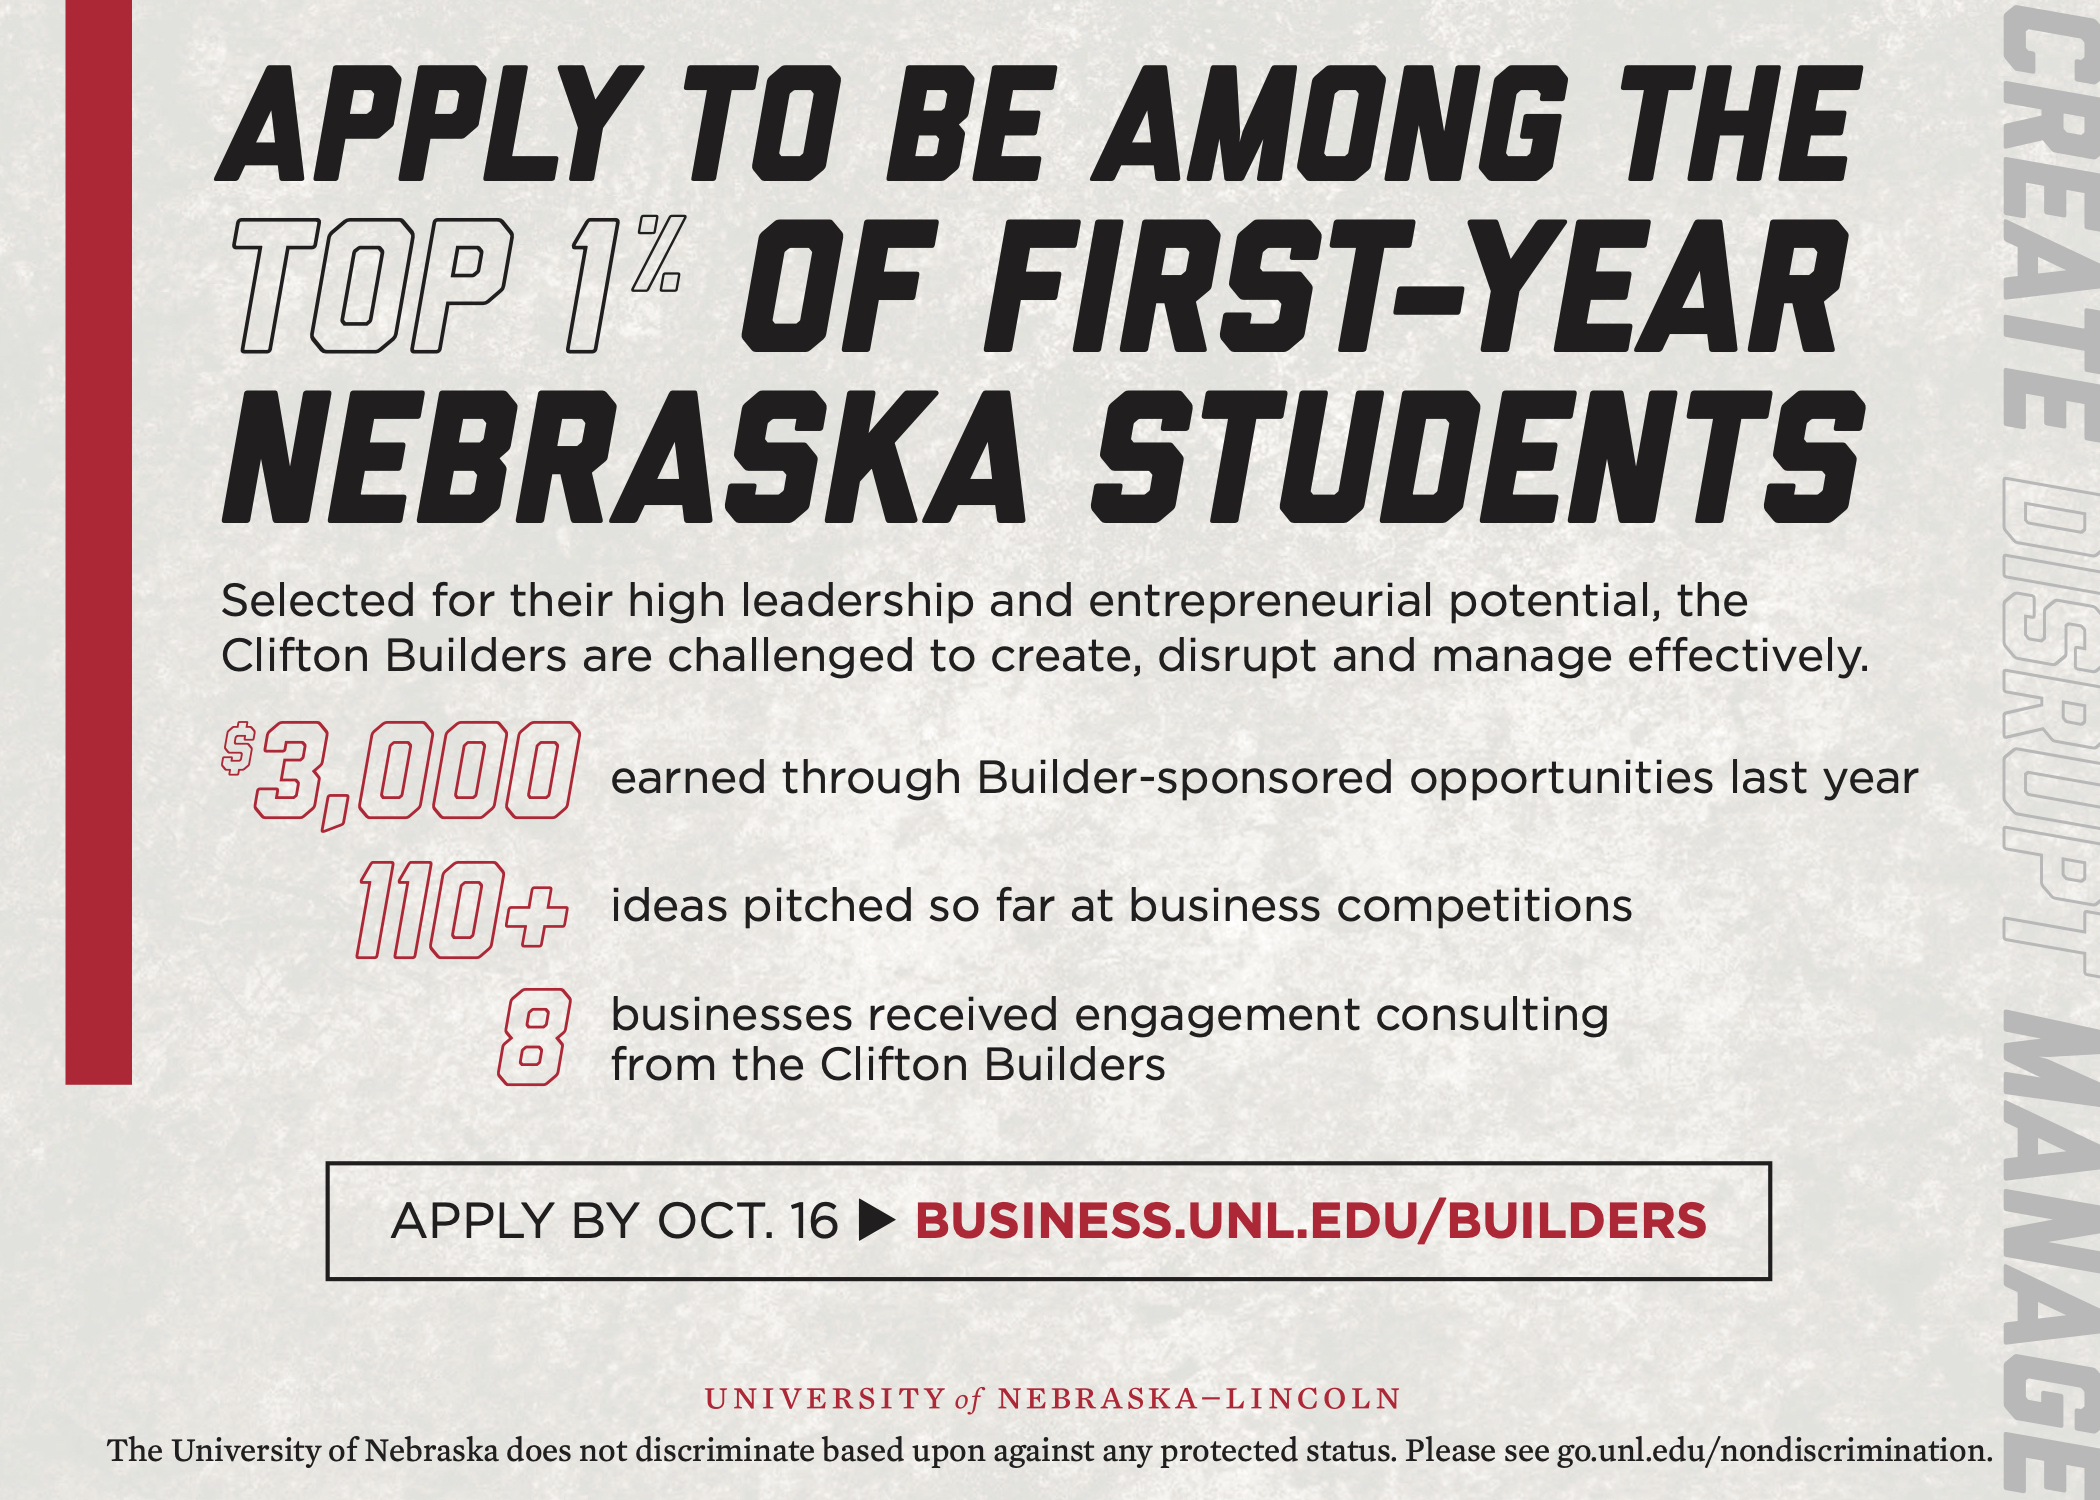 Applications are due October 16 at business.unl.edu/builders